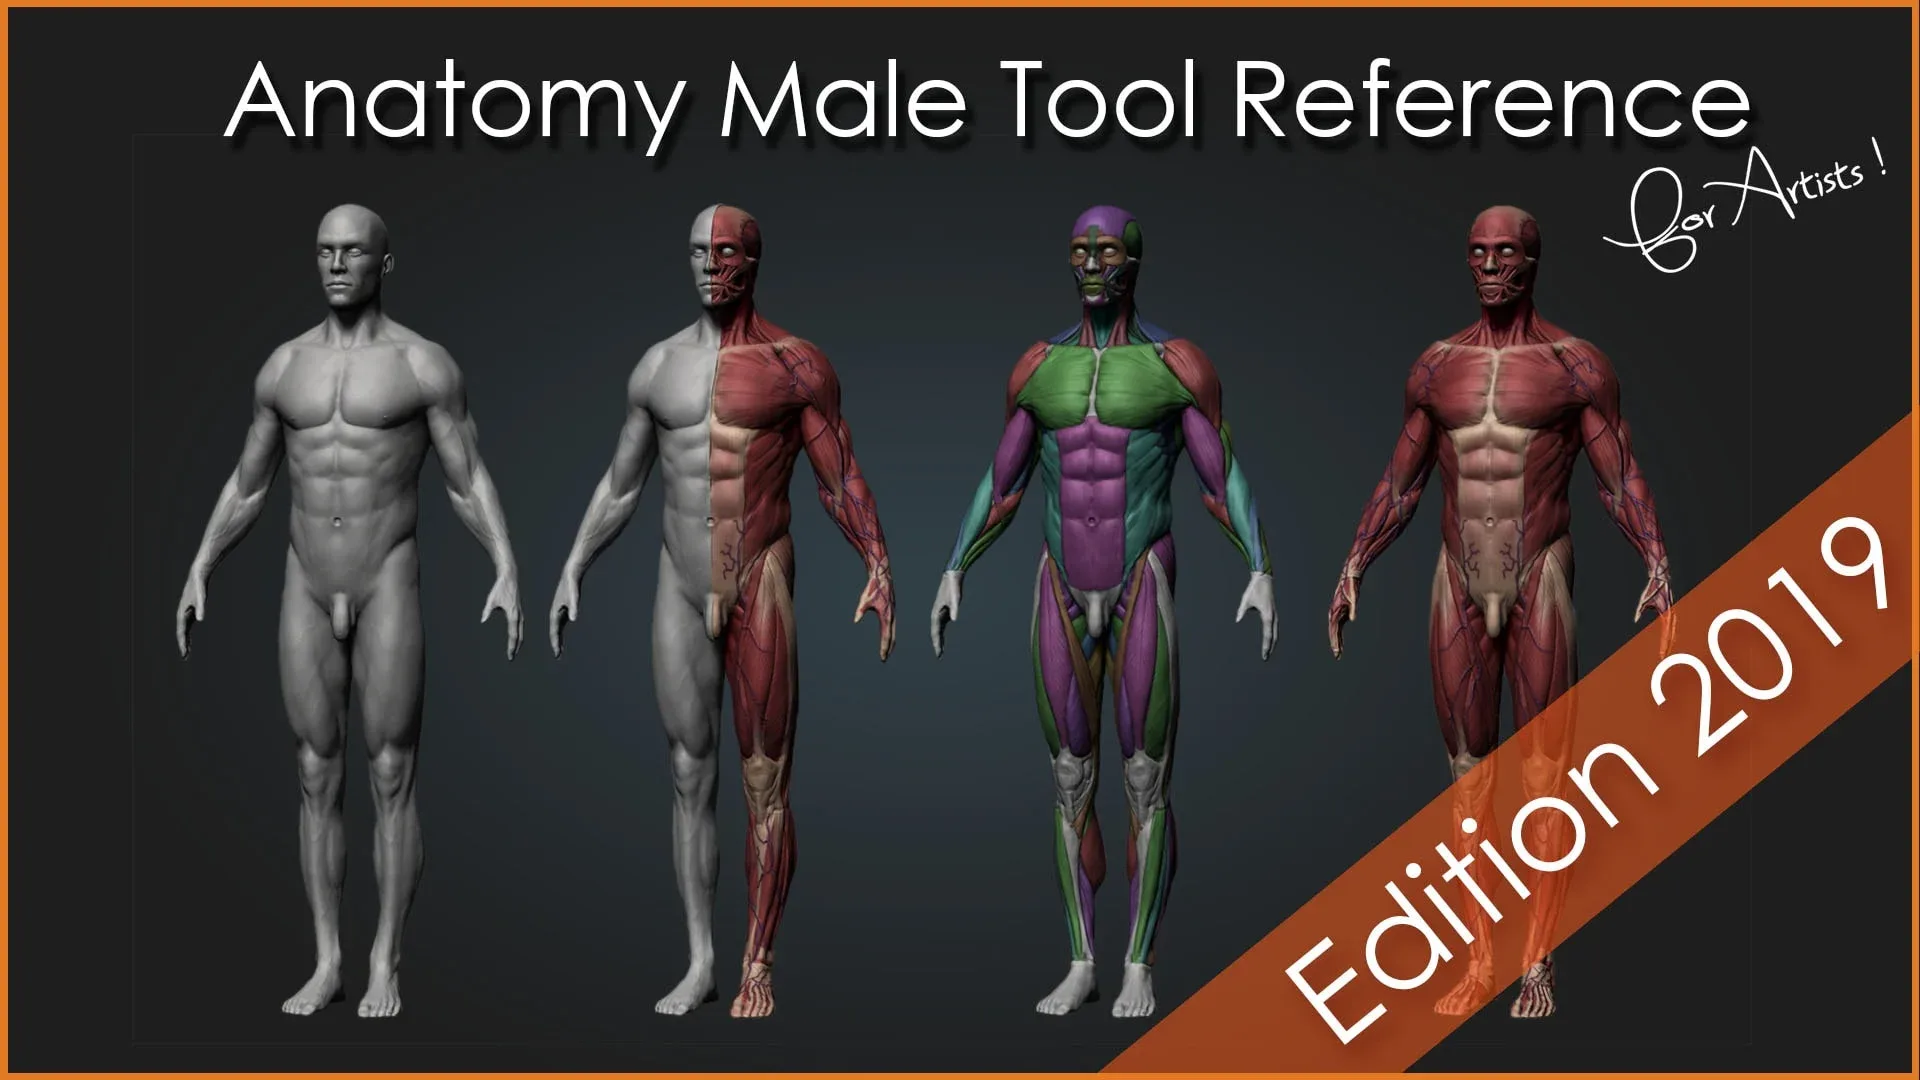 Anatomy Male Reference Tool for Artists